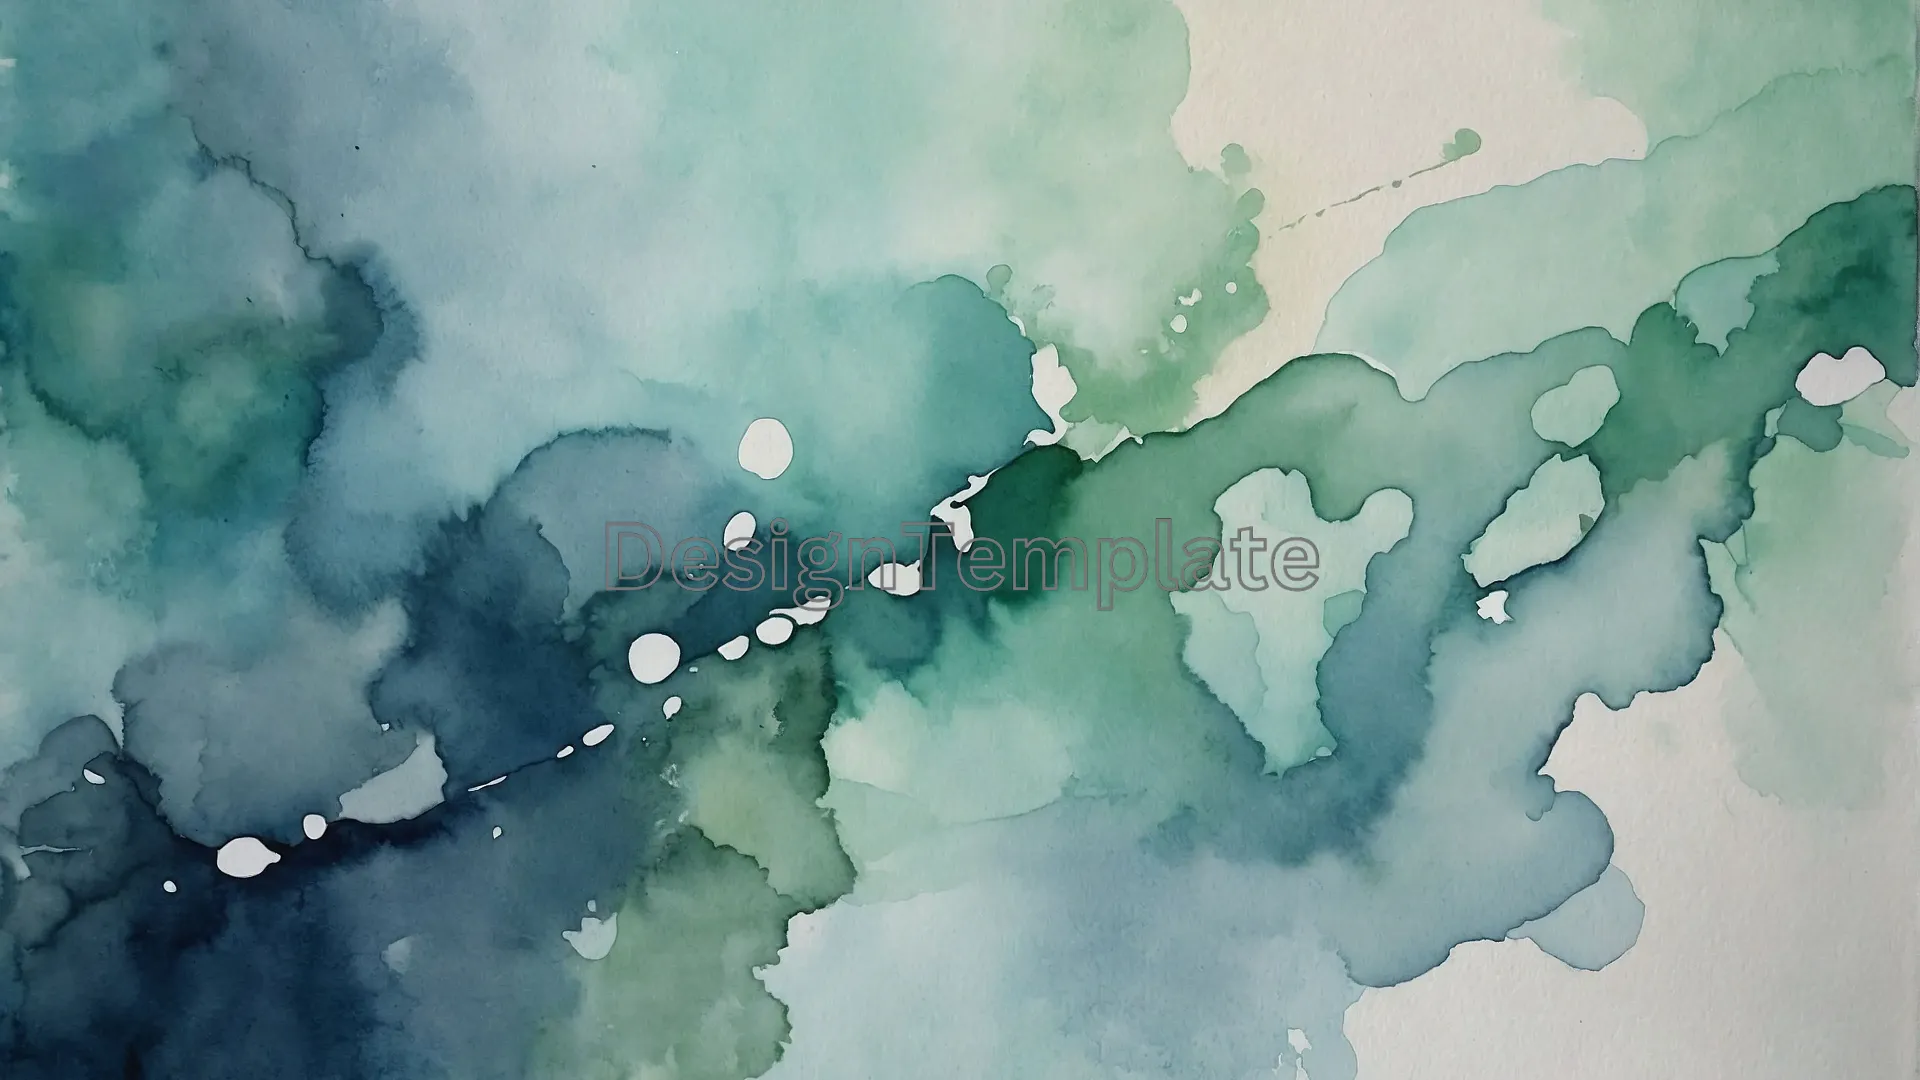 Download Abstract Watercolor Paint Background Image